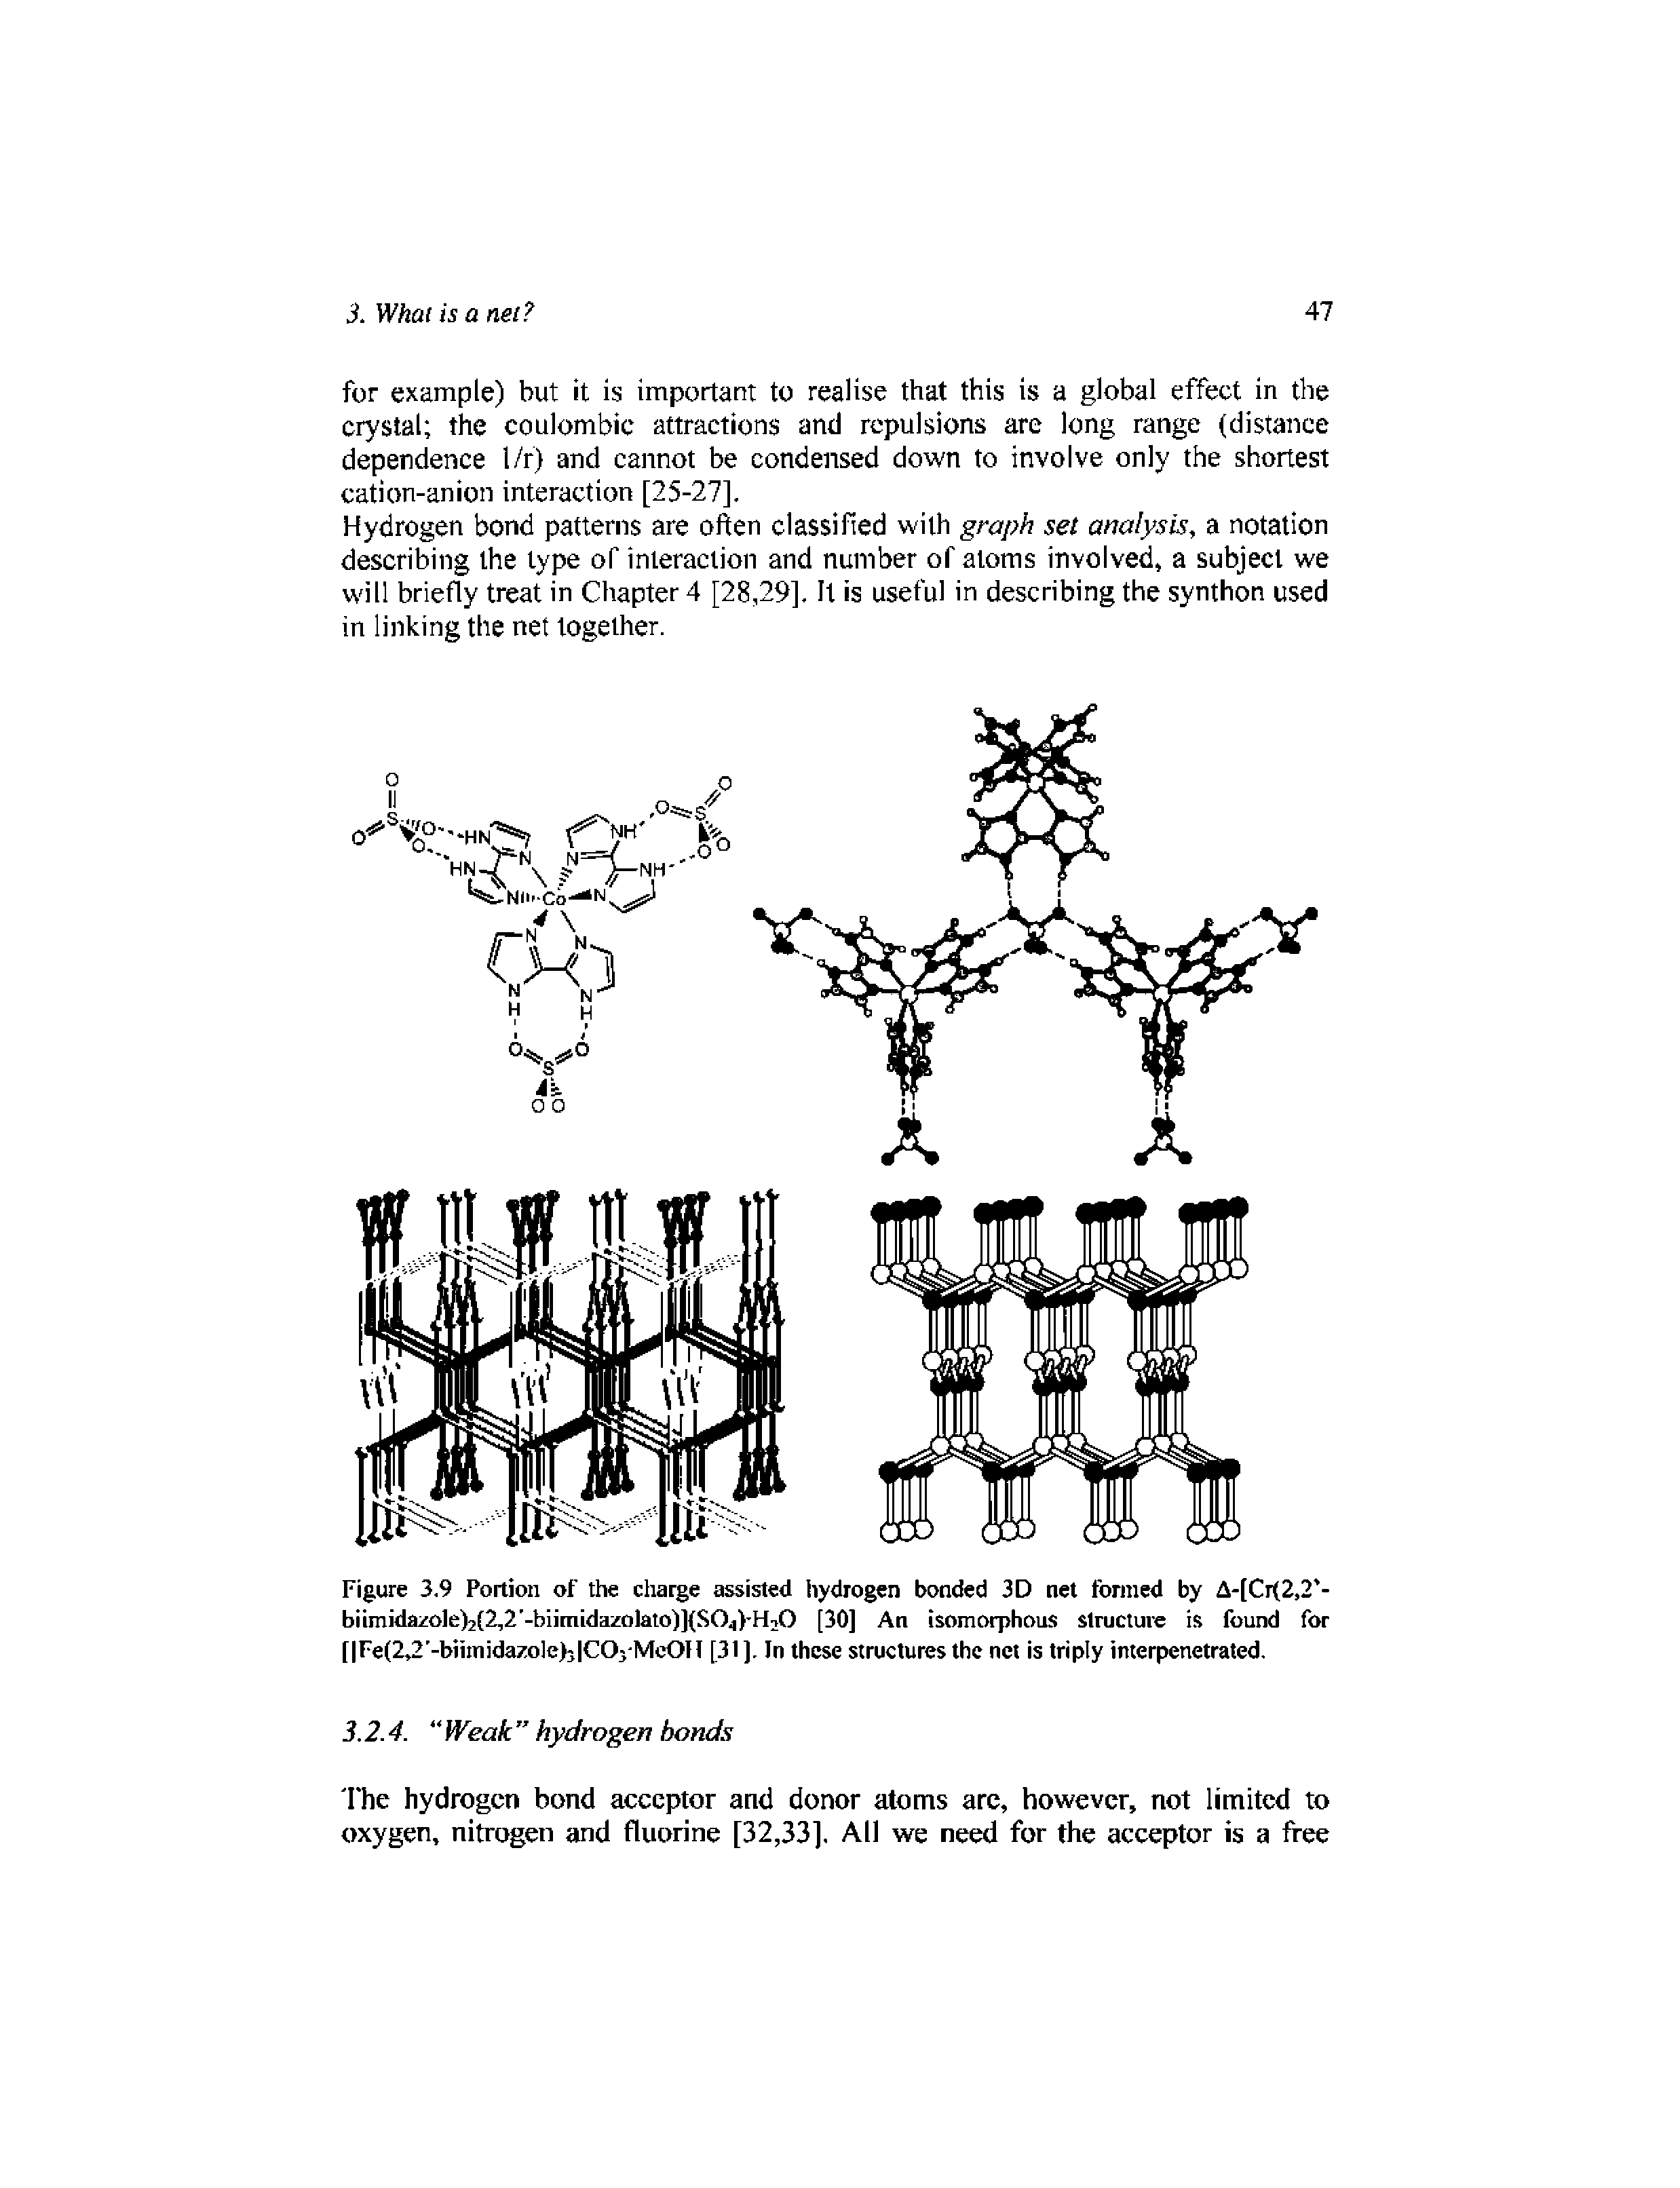 Figure 3,9 Portion of the charge assisted hydrogen bonded 3D net formed by A-[Cr(2,2 -biimida20le)2(2,2 -biitnidazolato)](S04)-H20 [30] An isomorphous structure is found for [ Fe(2,2 -biimidazole>j COj-McOU [31], In these structures the net is triply interpenetrated.